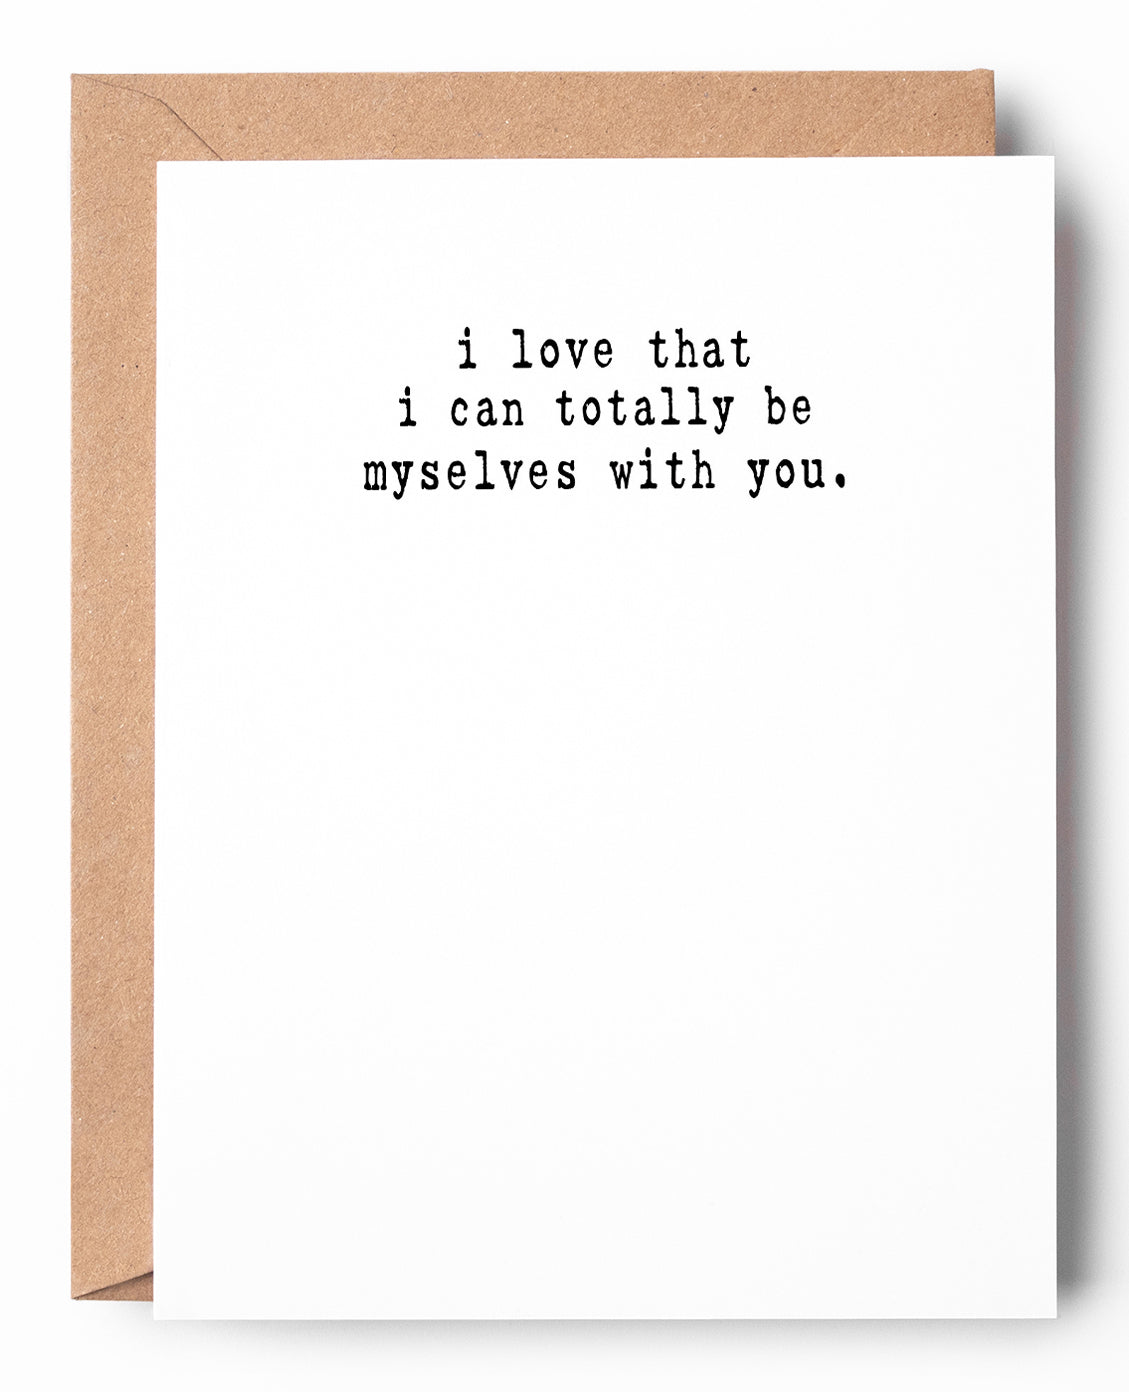 Funny letterpress love and friendship card that says: I love that I can totally be myselves with you.